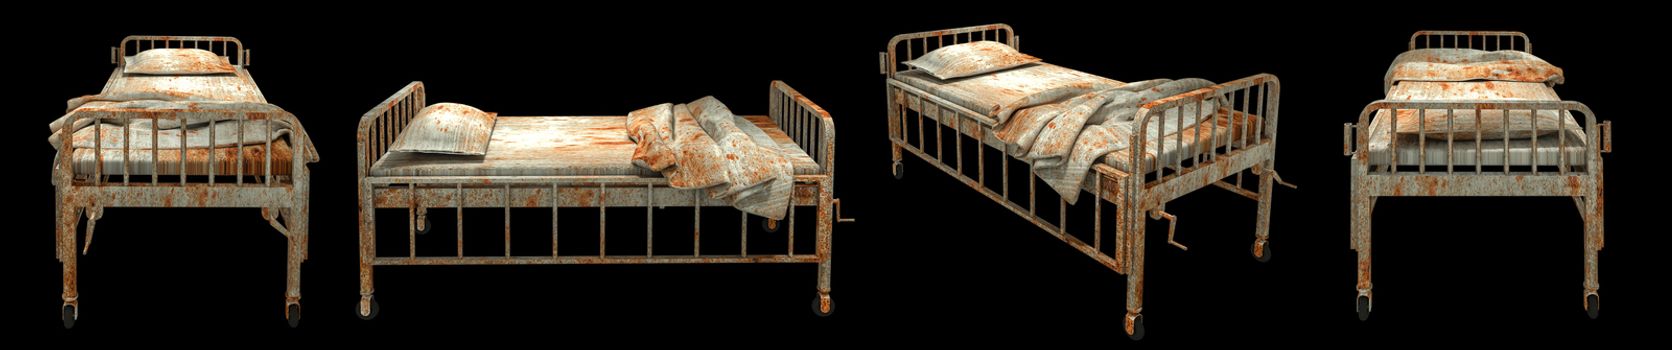 horror creepy and damage sickbed isolated over black background with clipping path.,3D rendering.